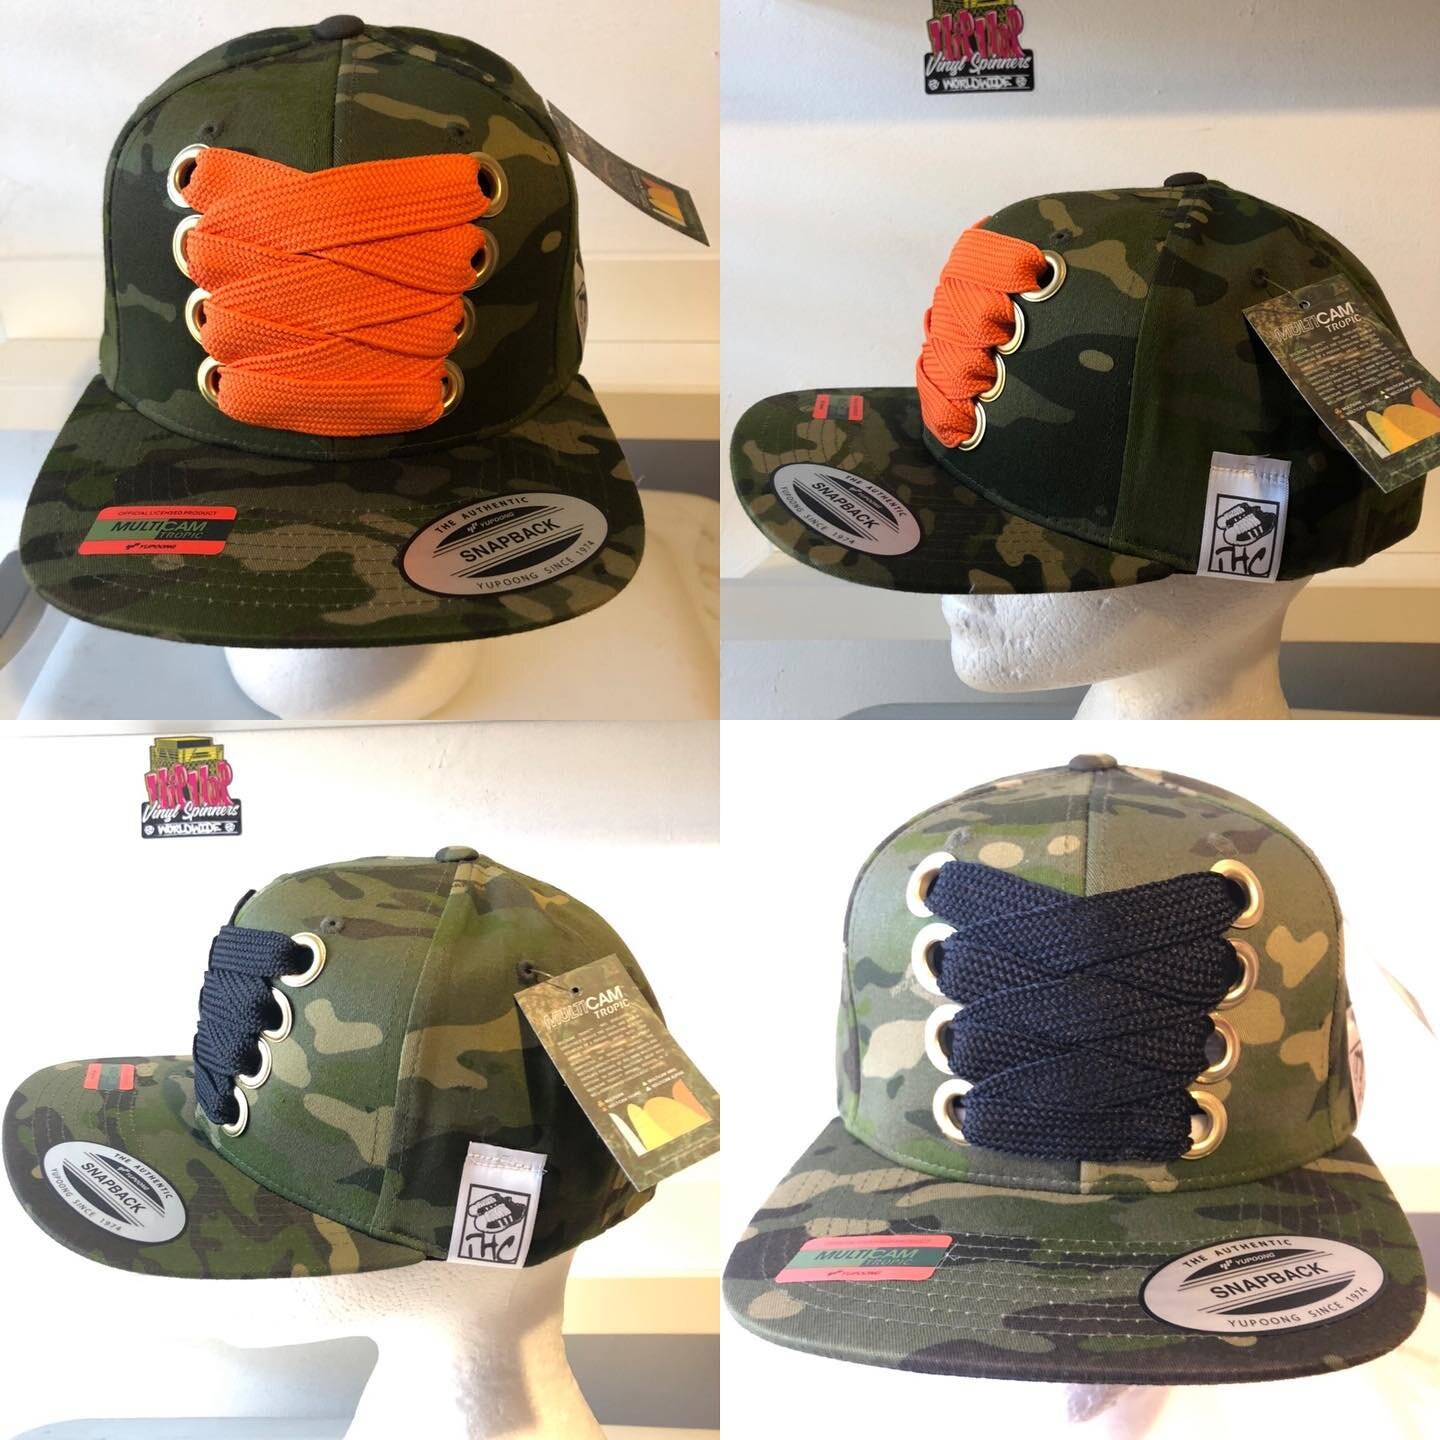 Some new Multicam Tropic variants - orange or black XL fat lace. High quality Yupoong Flexfit snapbacks (98% cotton, 2% spandex) remixed by hand with gold eyelets and XL fat laces for classic hip-hop style. True Headz know where it&rsquo;s at. $37.50